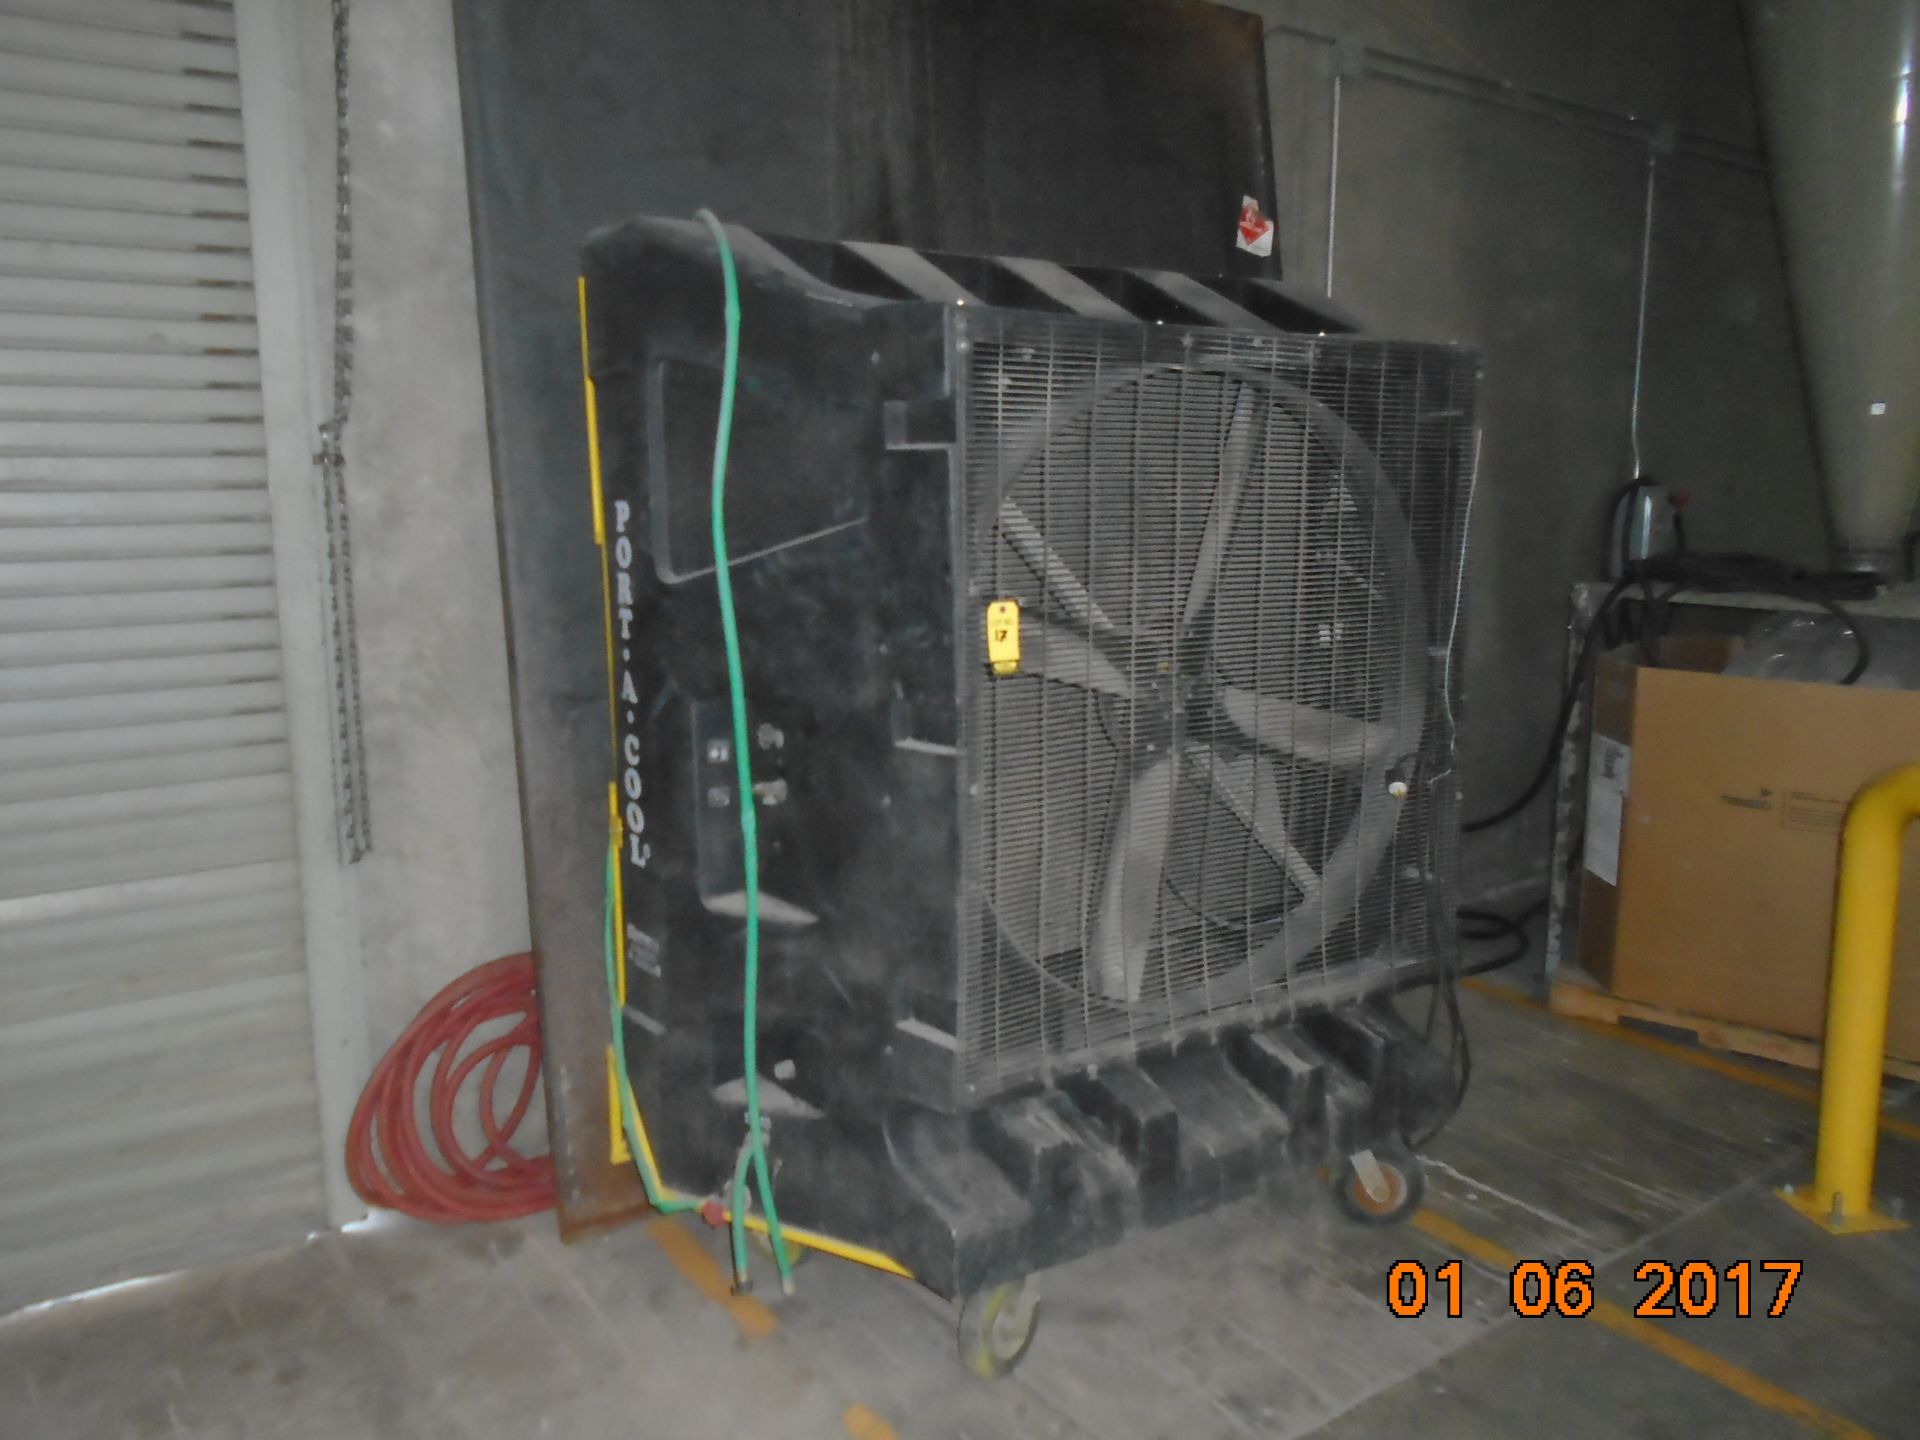 48" 2-Speed PORT-A-COOL EVAPORATIVE COOLER Model# PAC2K482S WITH CUSTOM SUPPORT STAND - SLOTS FOR 20 - Image 3 of 5